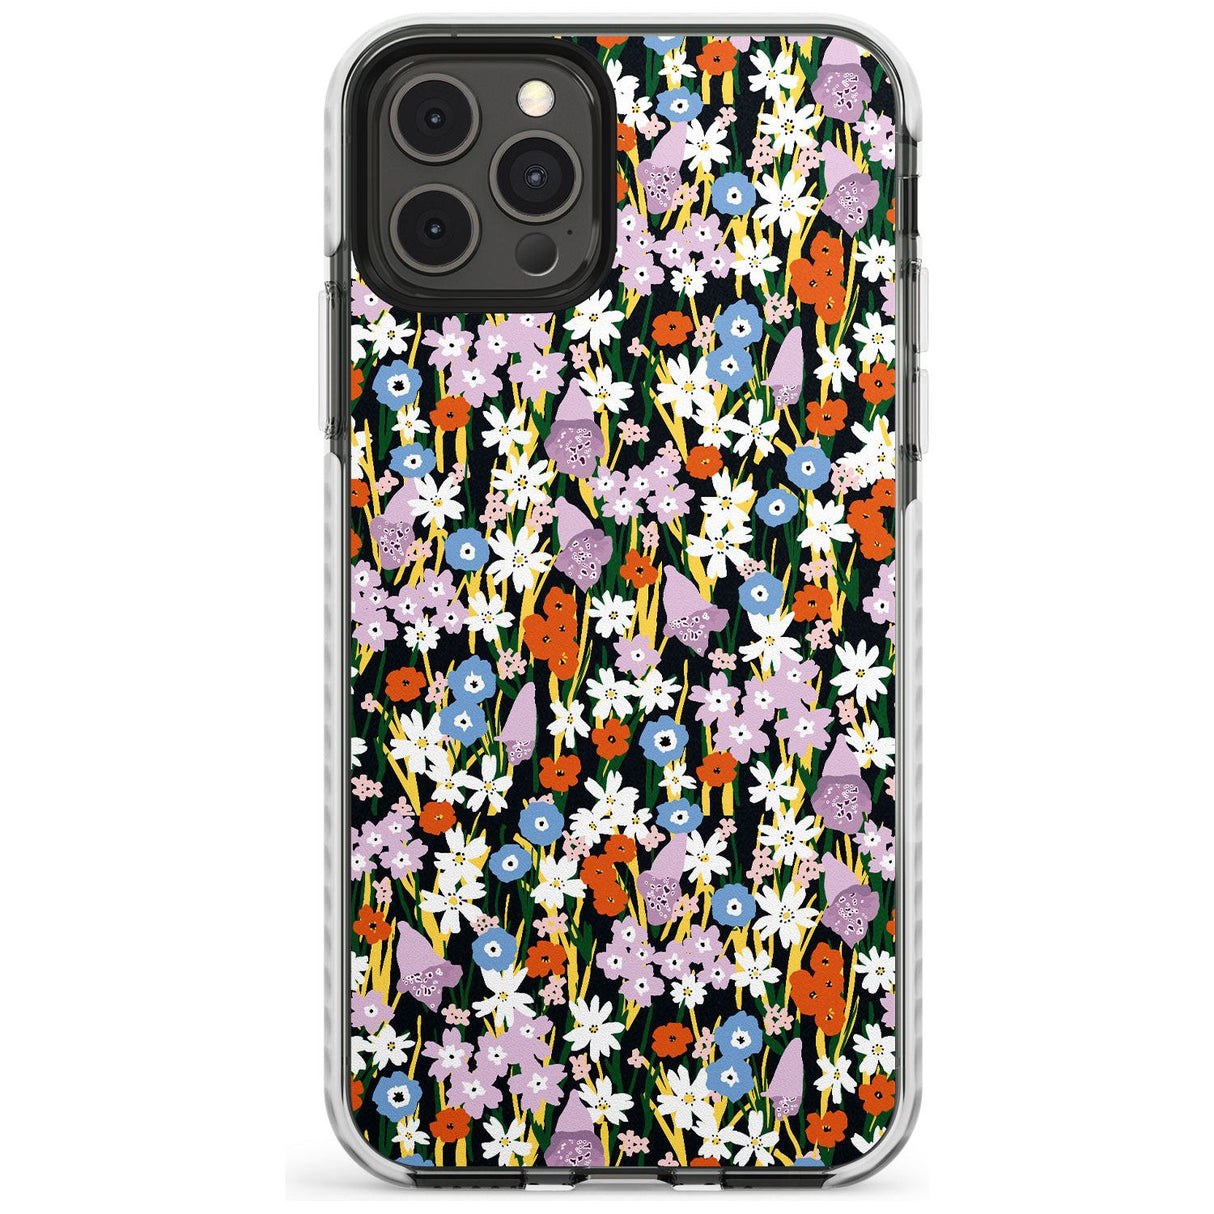 Energetic Floral Mix: Solid Slim TPU Phone Case for iPhone 11 Pro Max